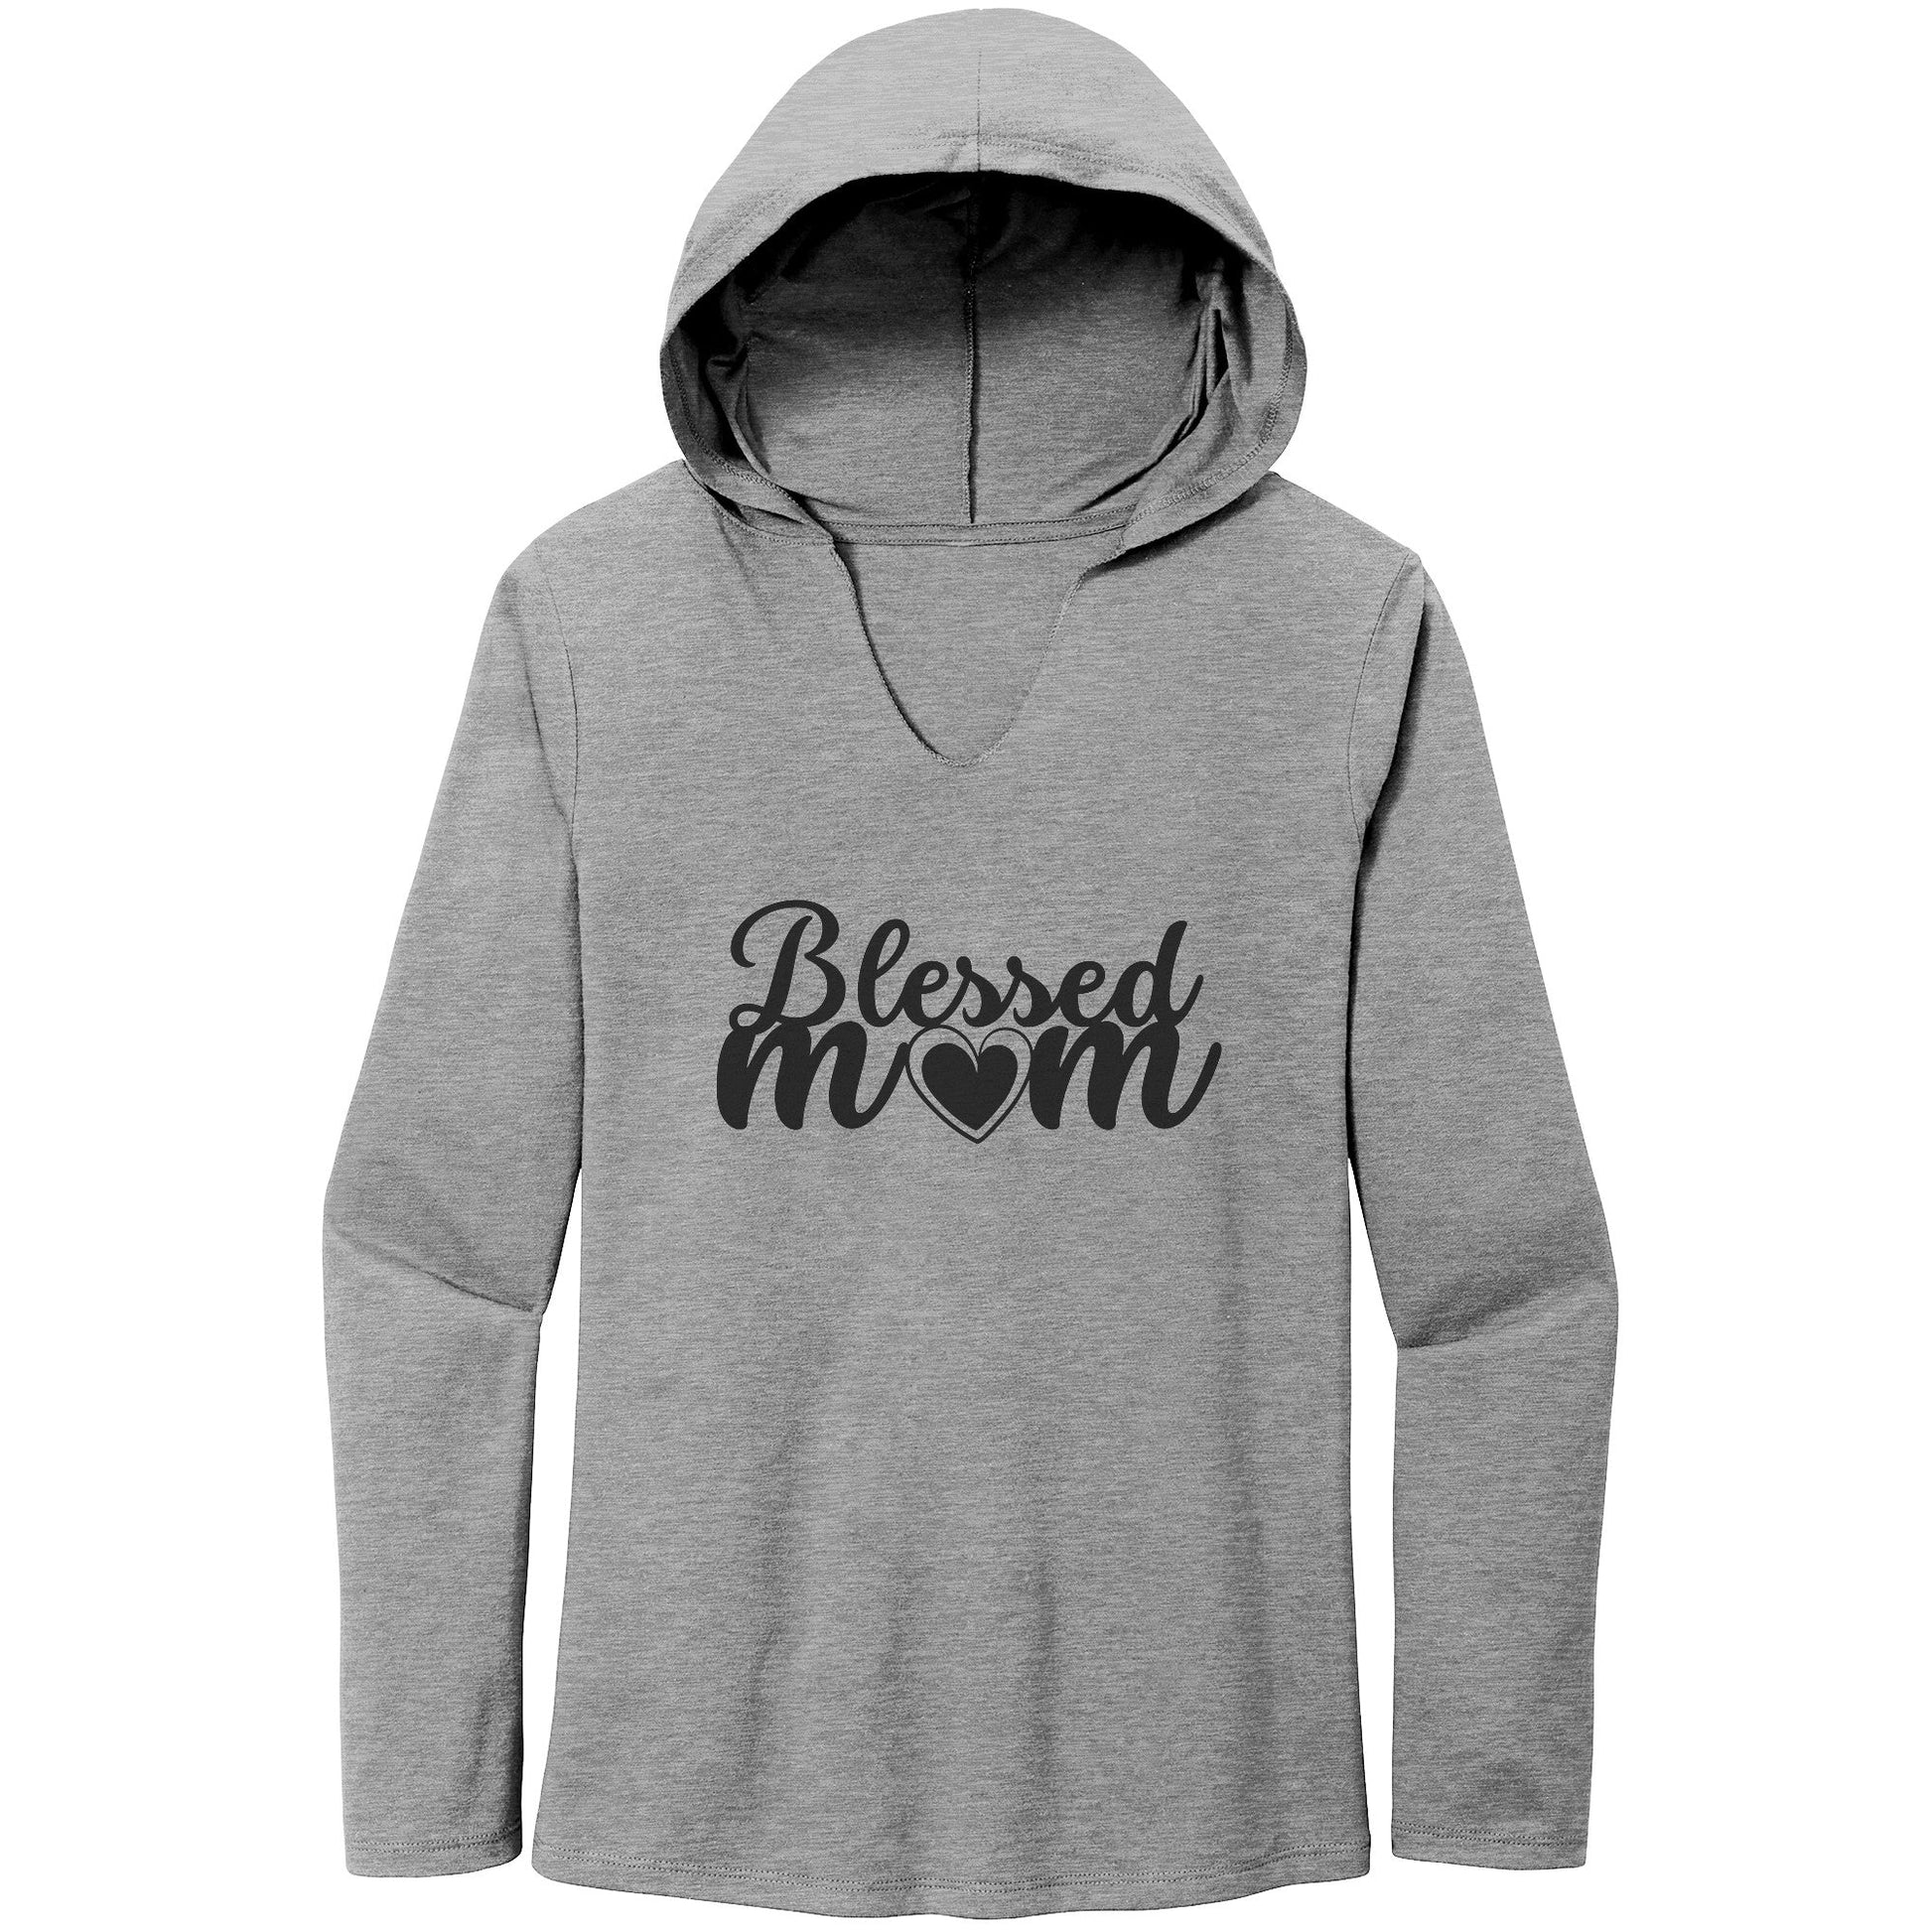 Blessed MOM Tri Long Sleeve Hoodie-Apparel-Grey Frost-XS-mysticalcherry